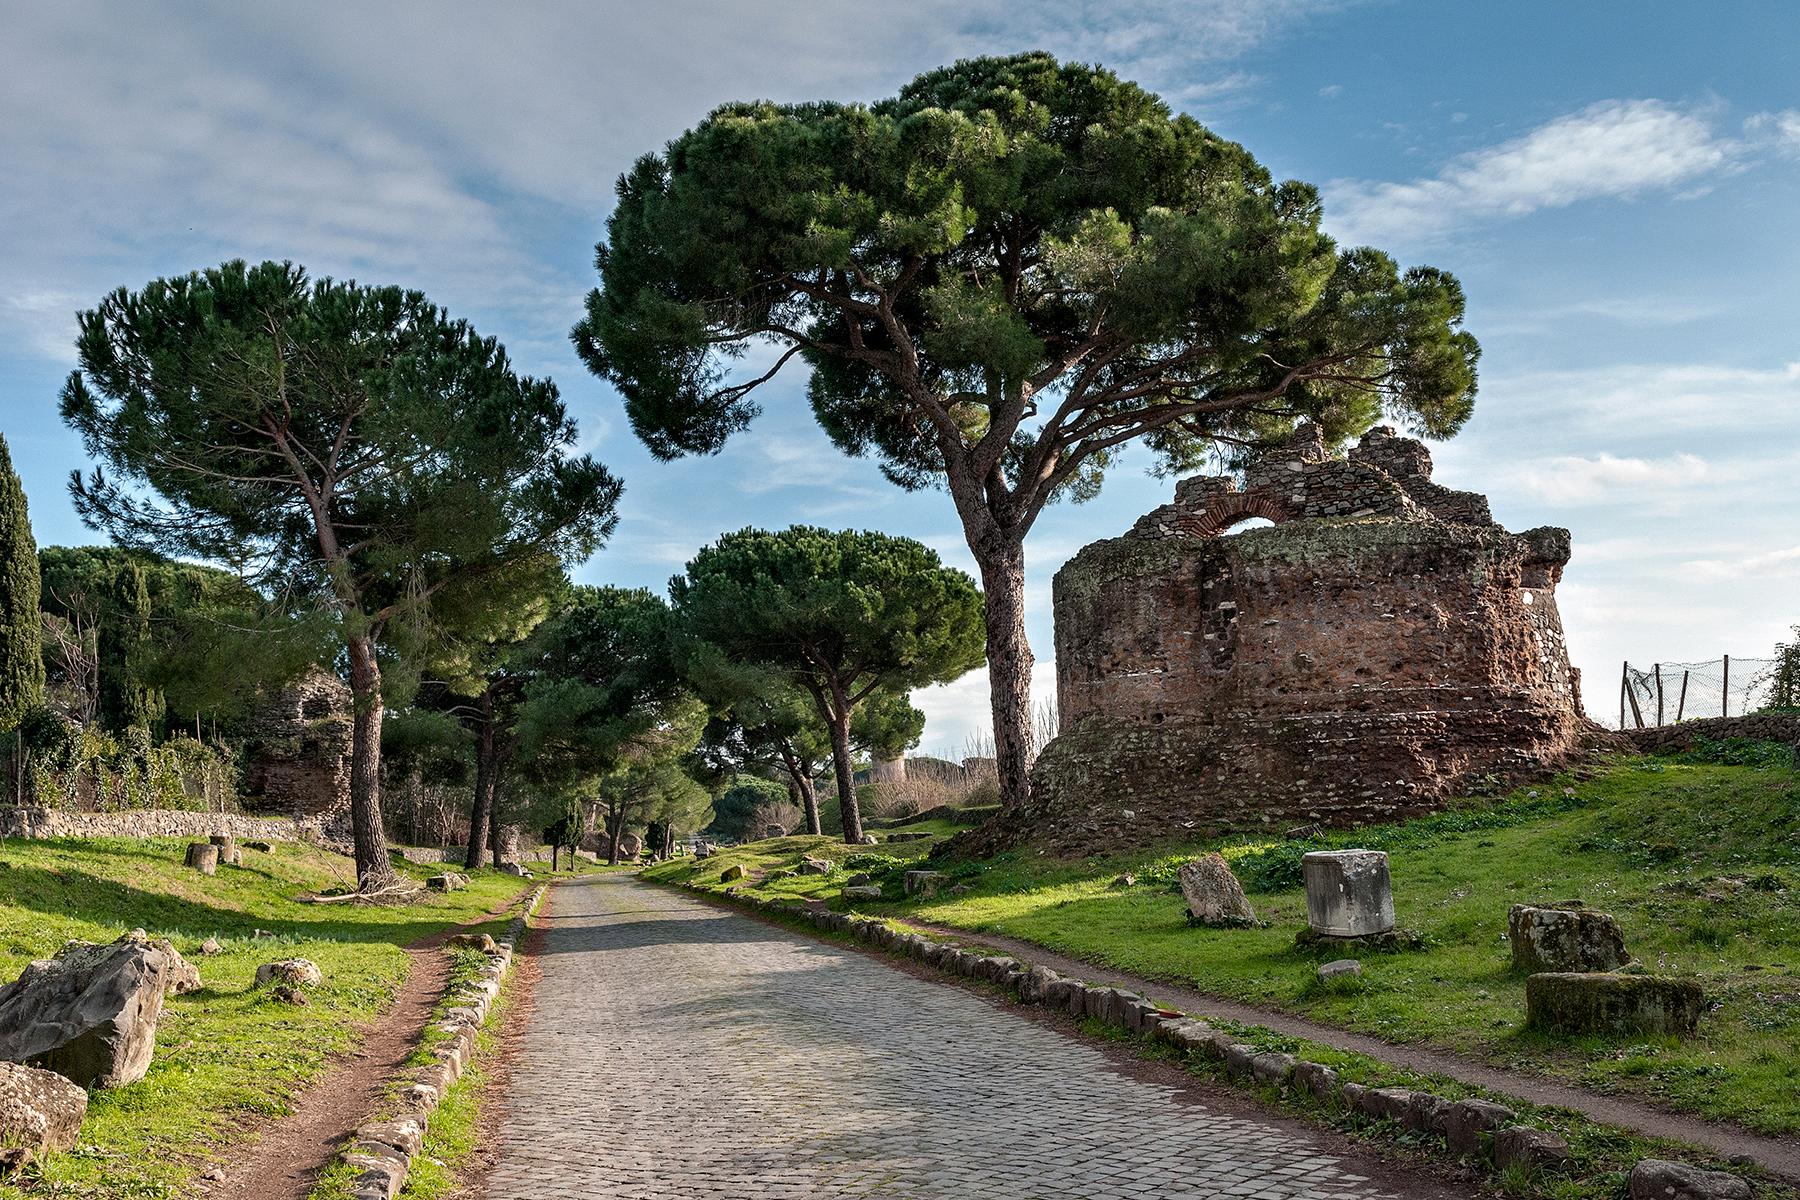 10 Under-the-Radar Things to Do in Rome